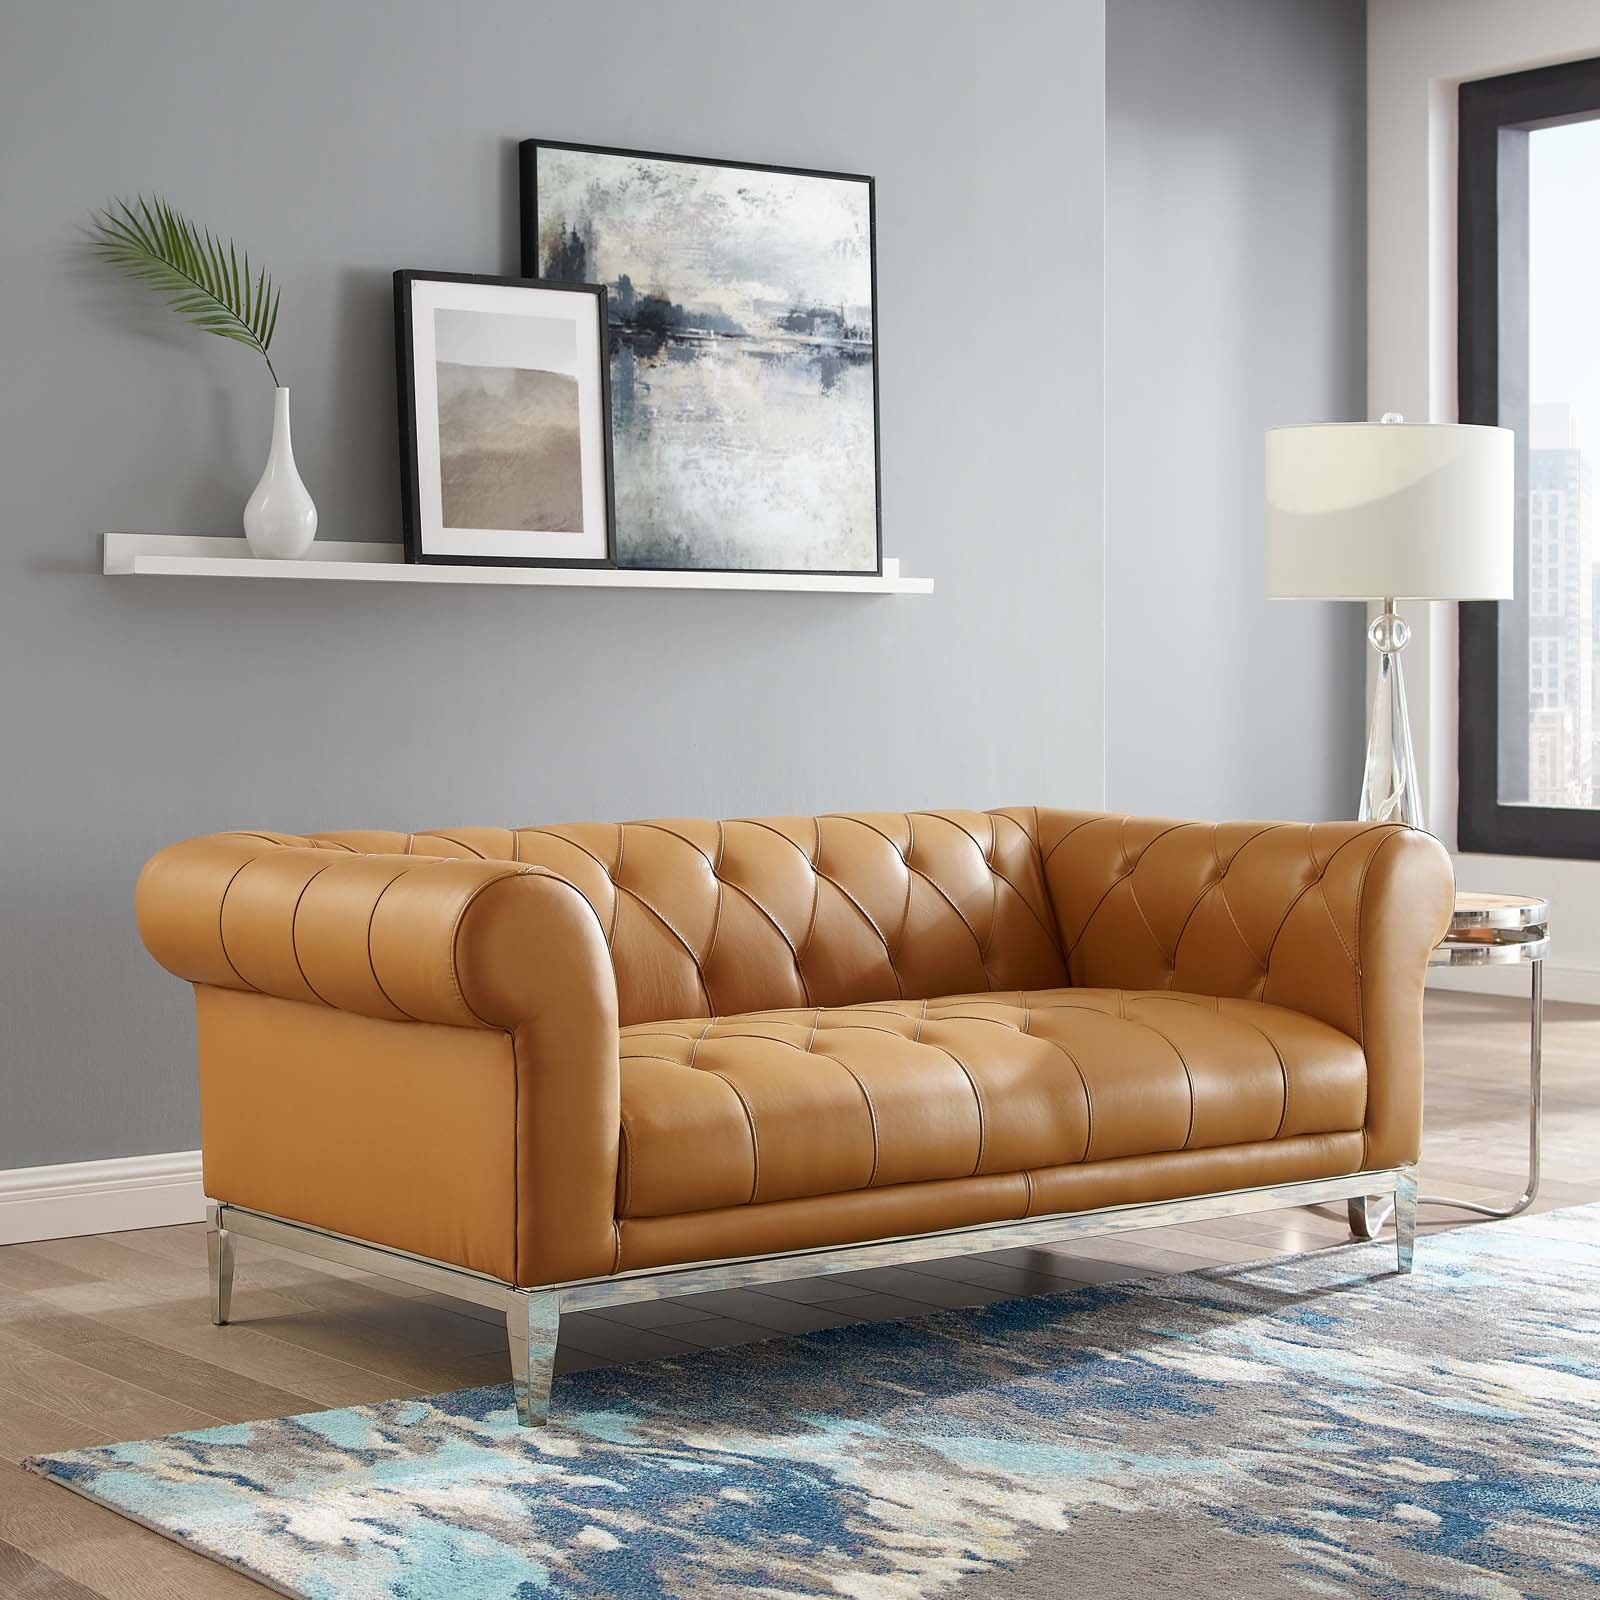 Idyll Tufted Button Upholstered Leather Chesterfield Loveseat-Loveseat-Modway-Wall2Wall Furnishings